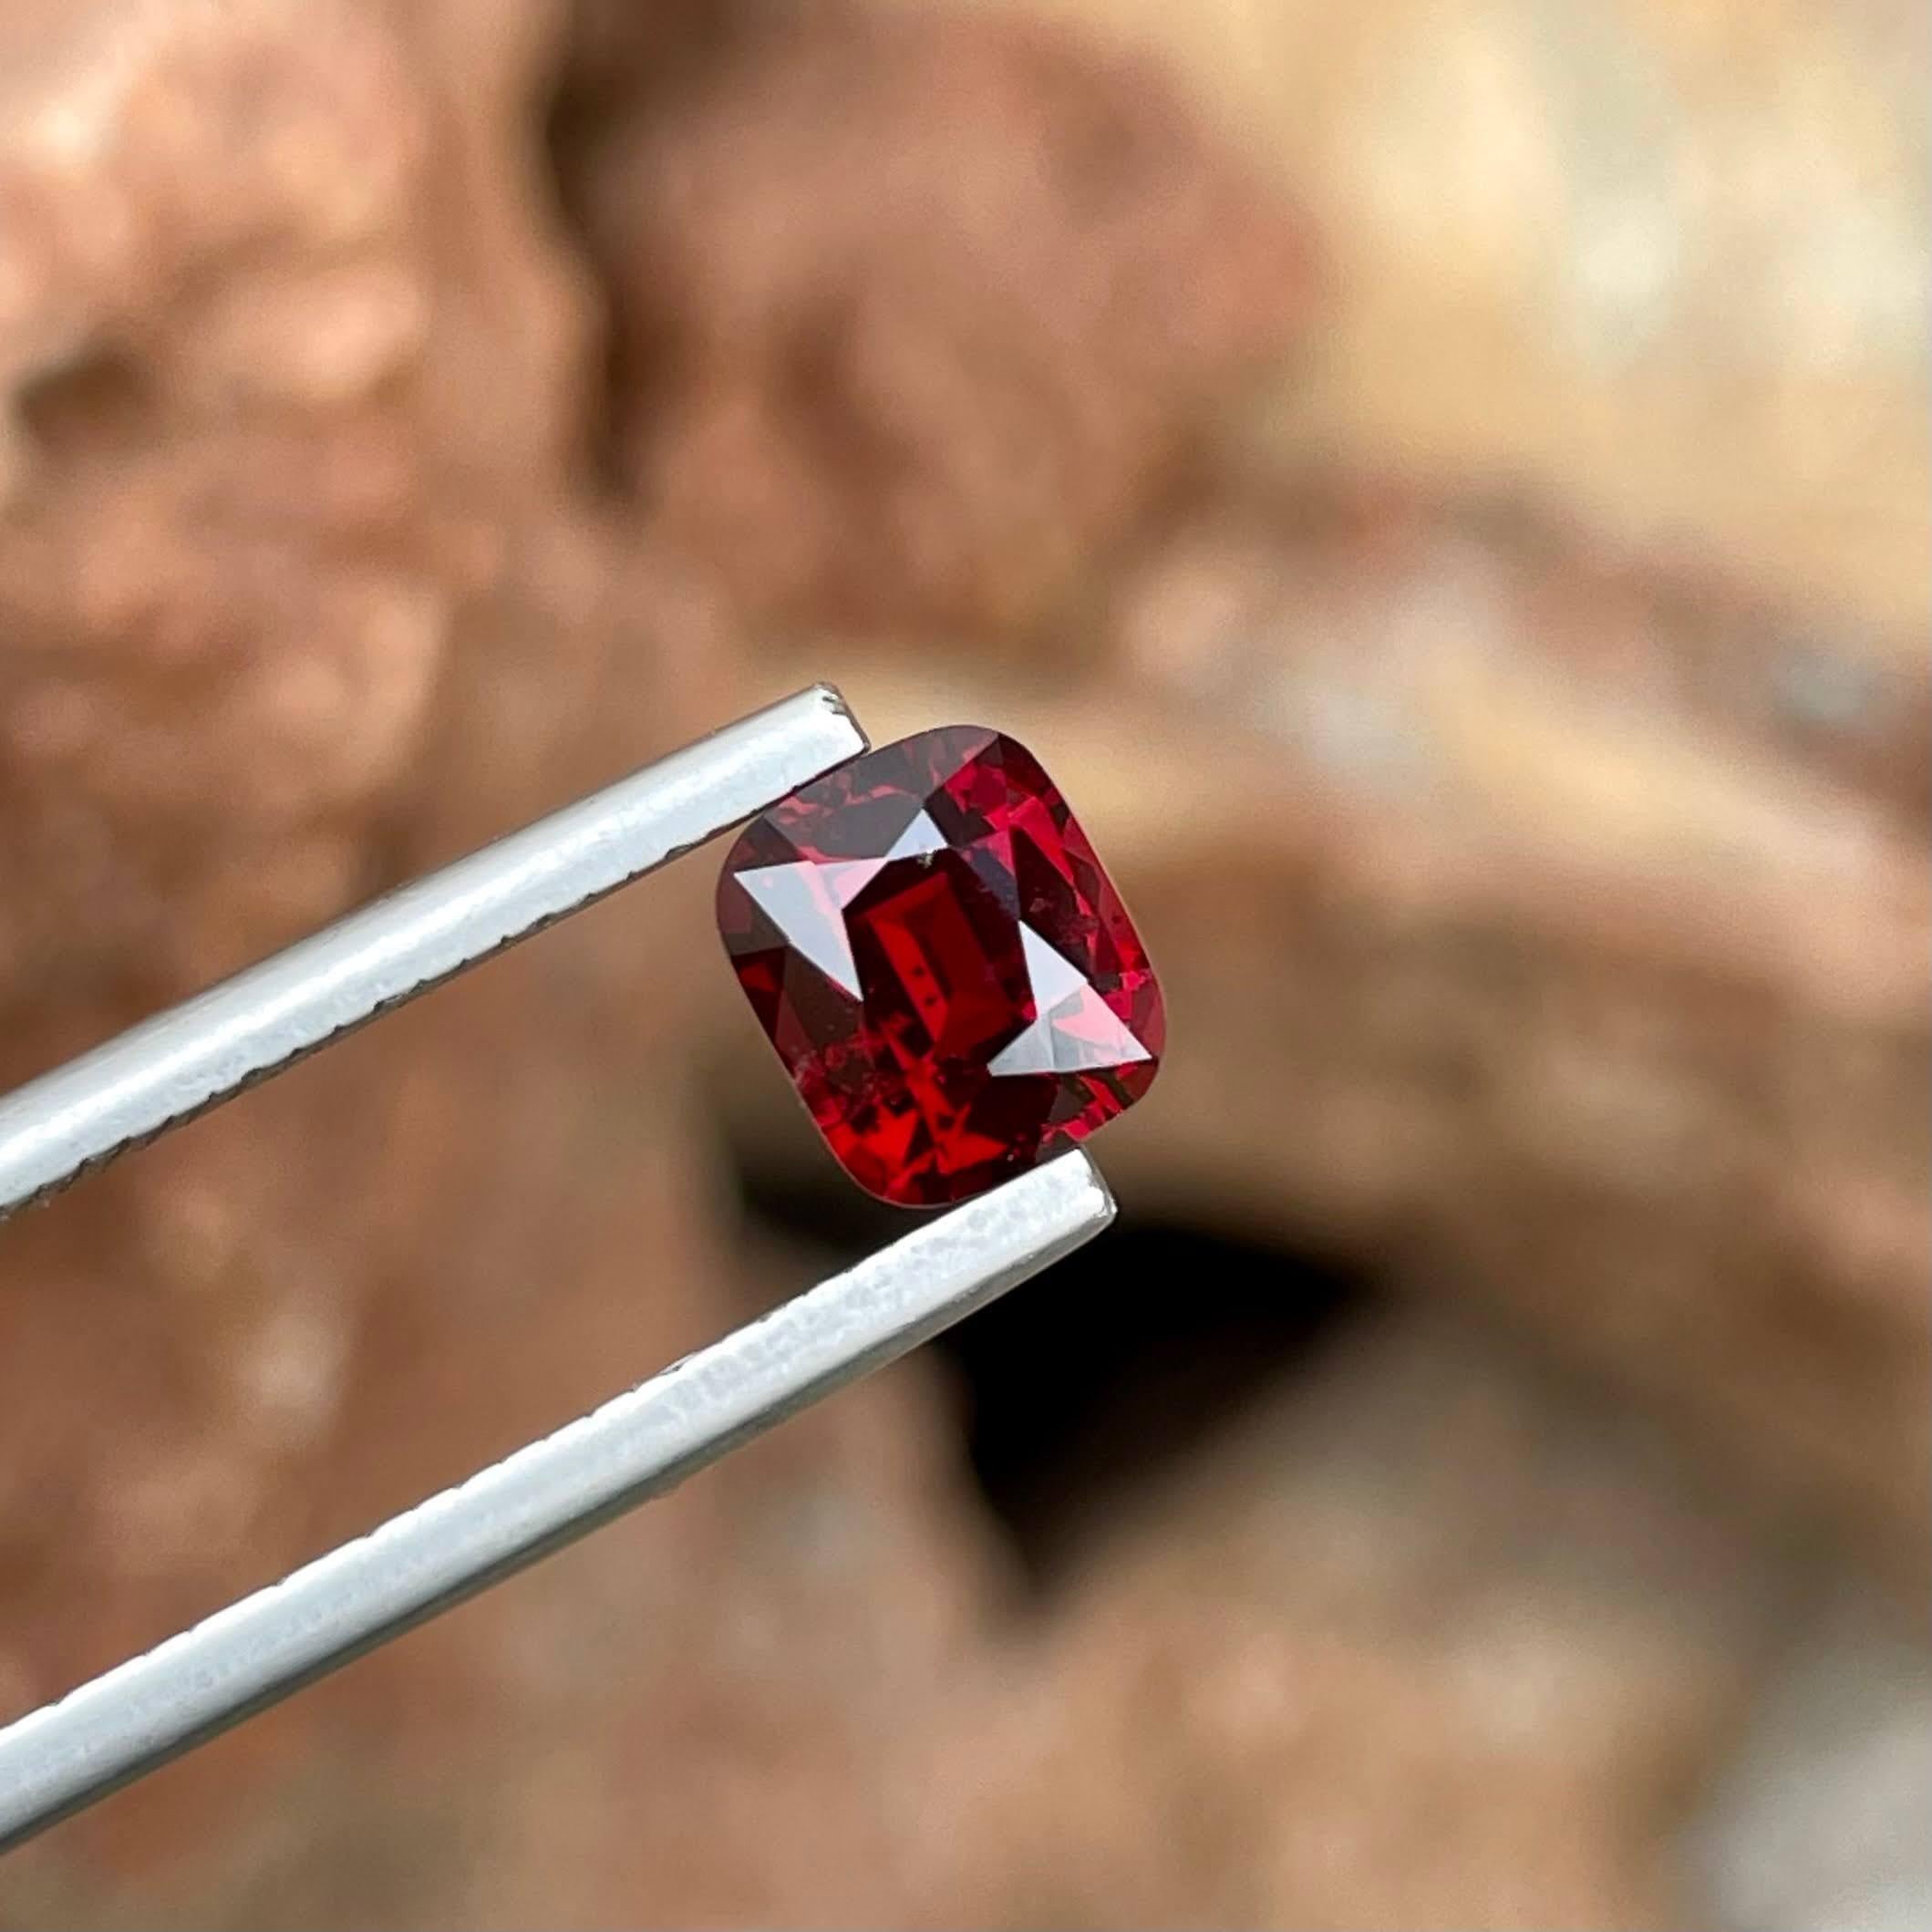 Weight 1.60 carats 
Dimensions 6.95x5.95x4.59 mm
Treatment none 
Origin Burma 
Clarity SI
Shape cushion 
Cut fancy cushion 




Behold the allure of this exquisite 1.60 carats Red Burmese Spinel, a gemstone of unparalleled beauty and rarity.